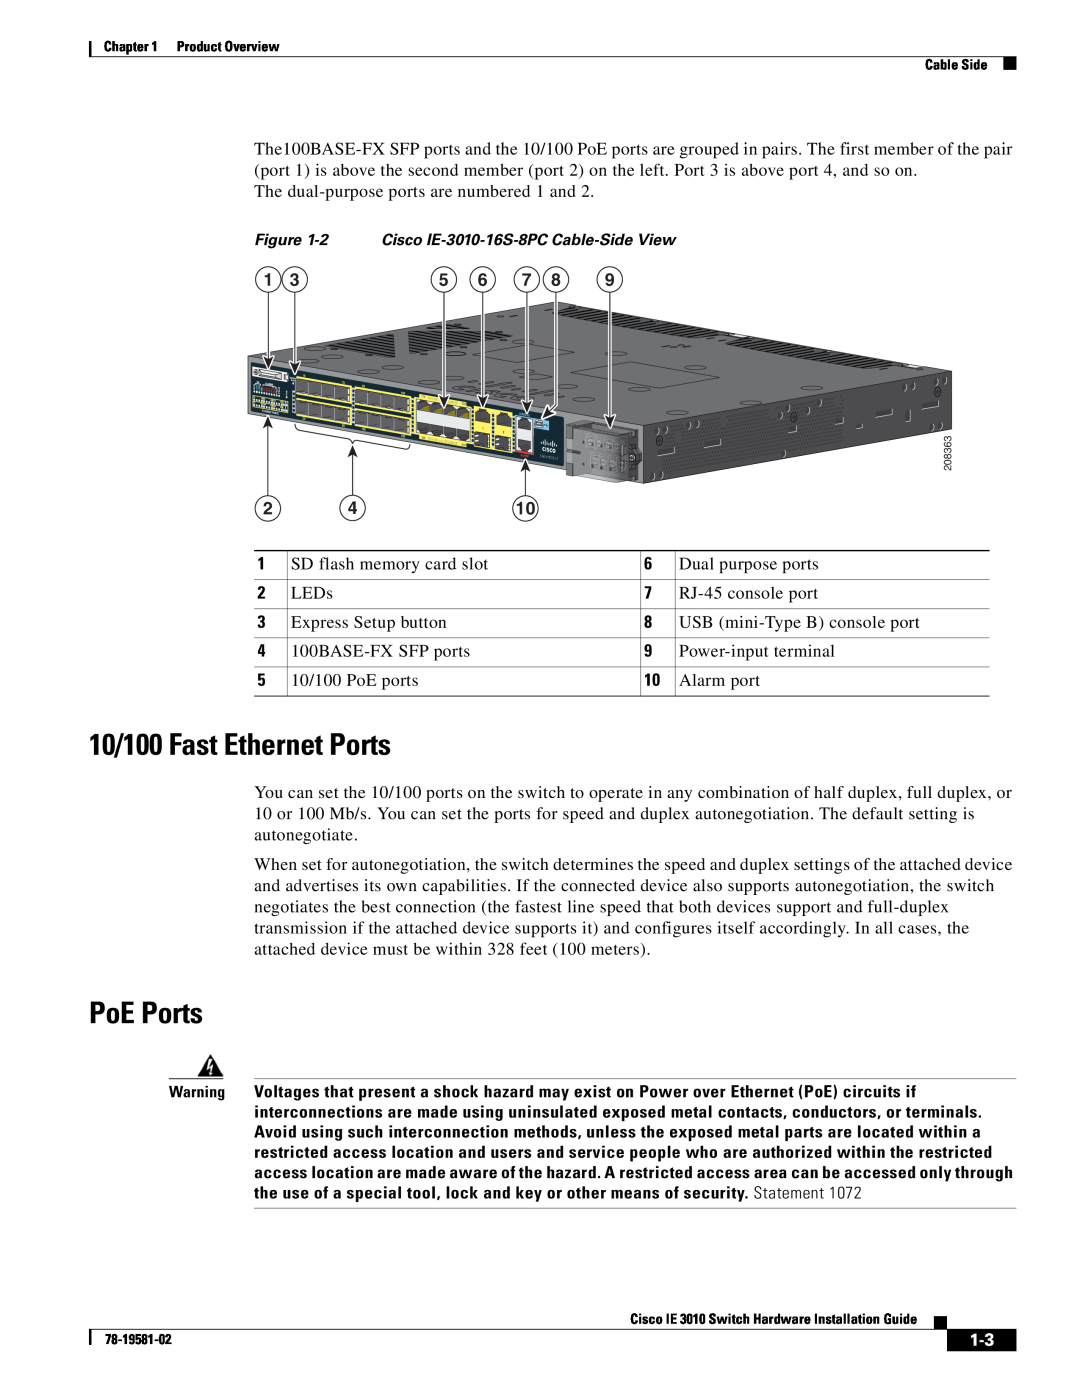 Cisco Systems IE301024TC manual 10/100 Fast Ethernet Ports, PoE Ports, 2 Cisco IE-3010-16S-8PC Cable-Side View 